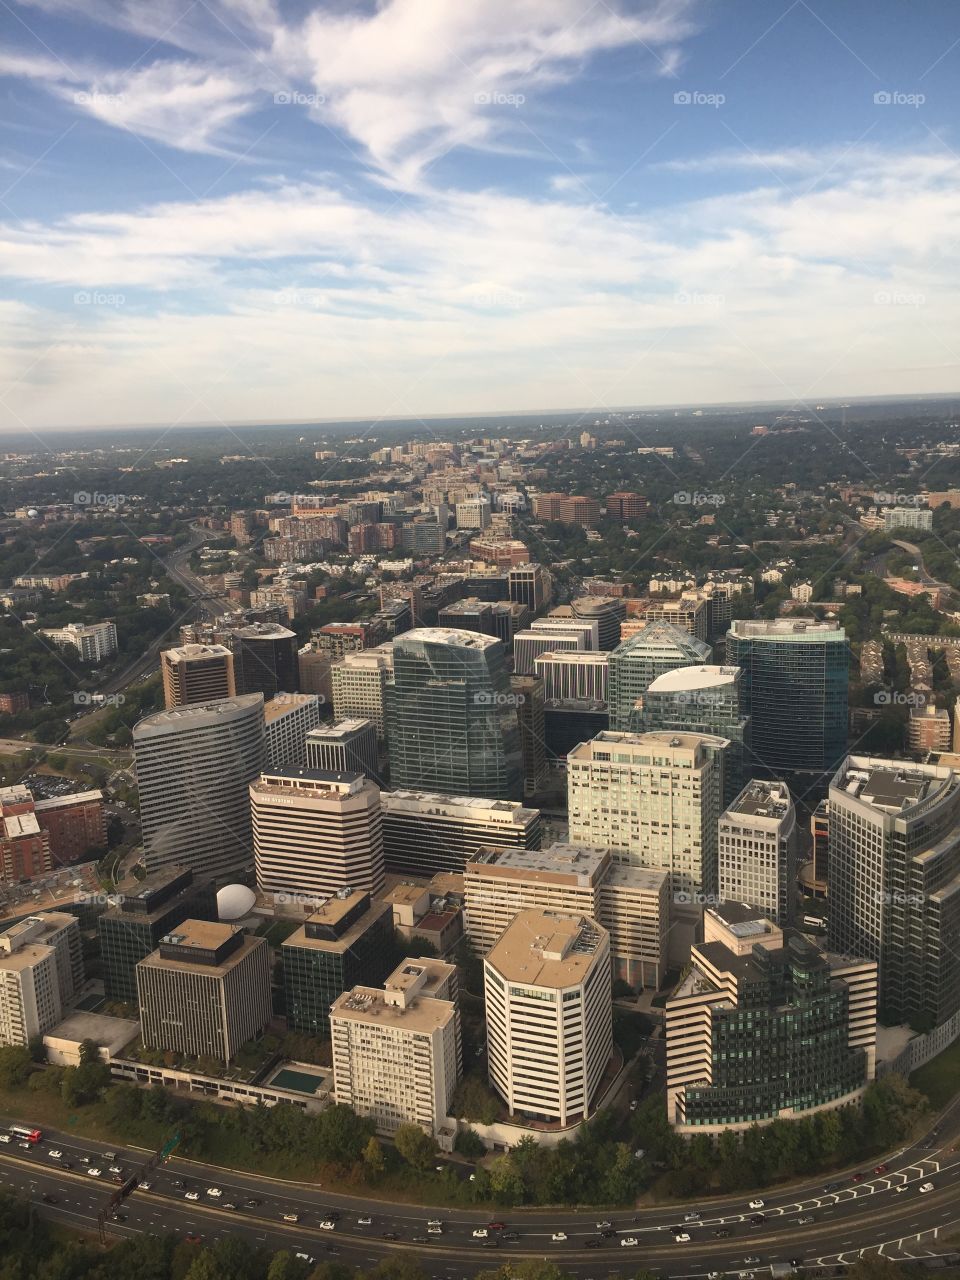 Flying Over DC
